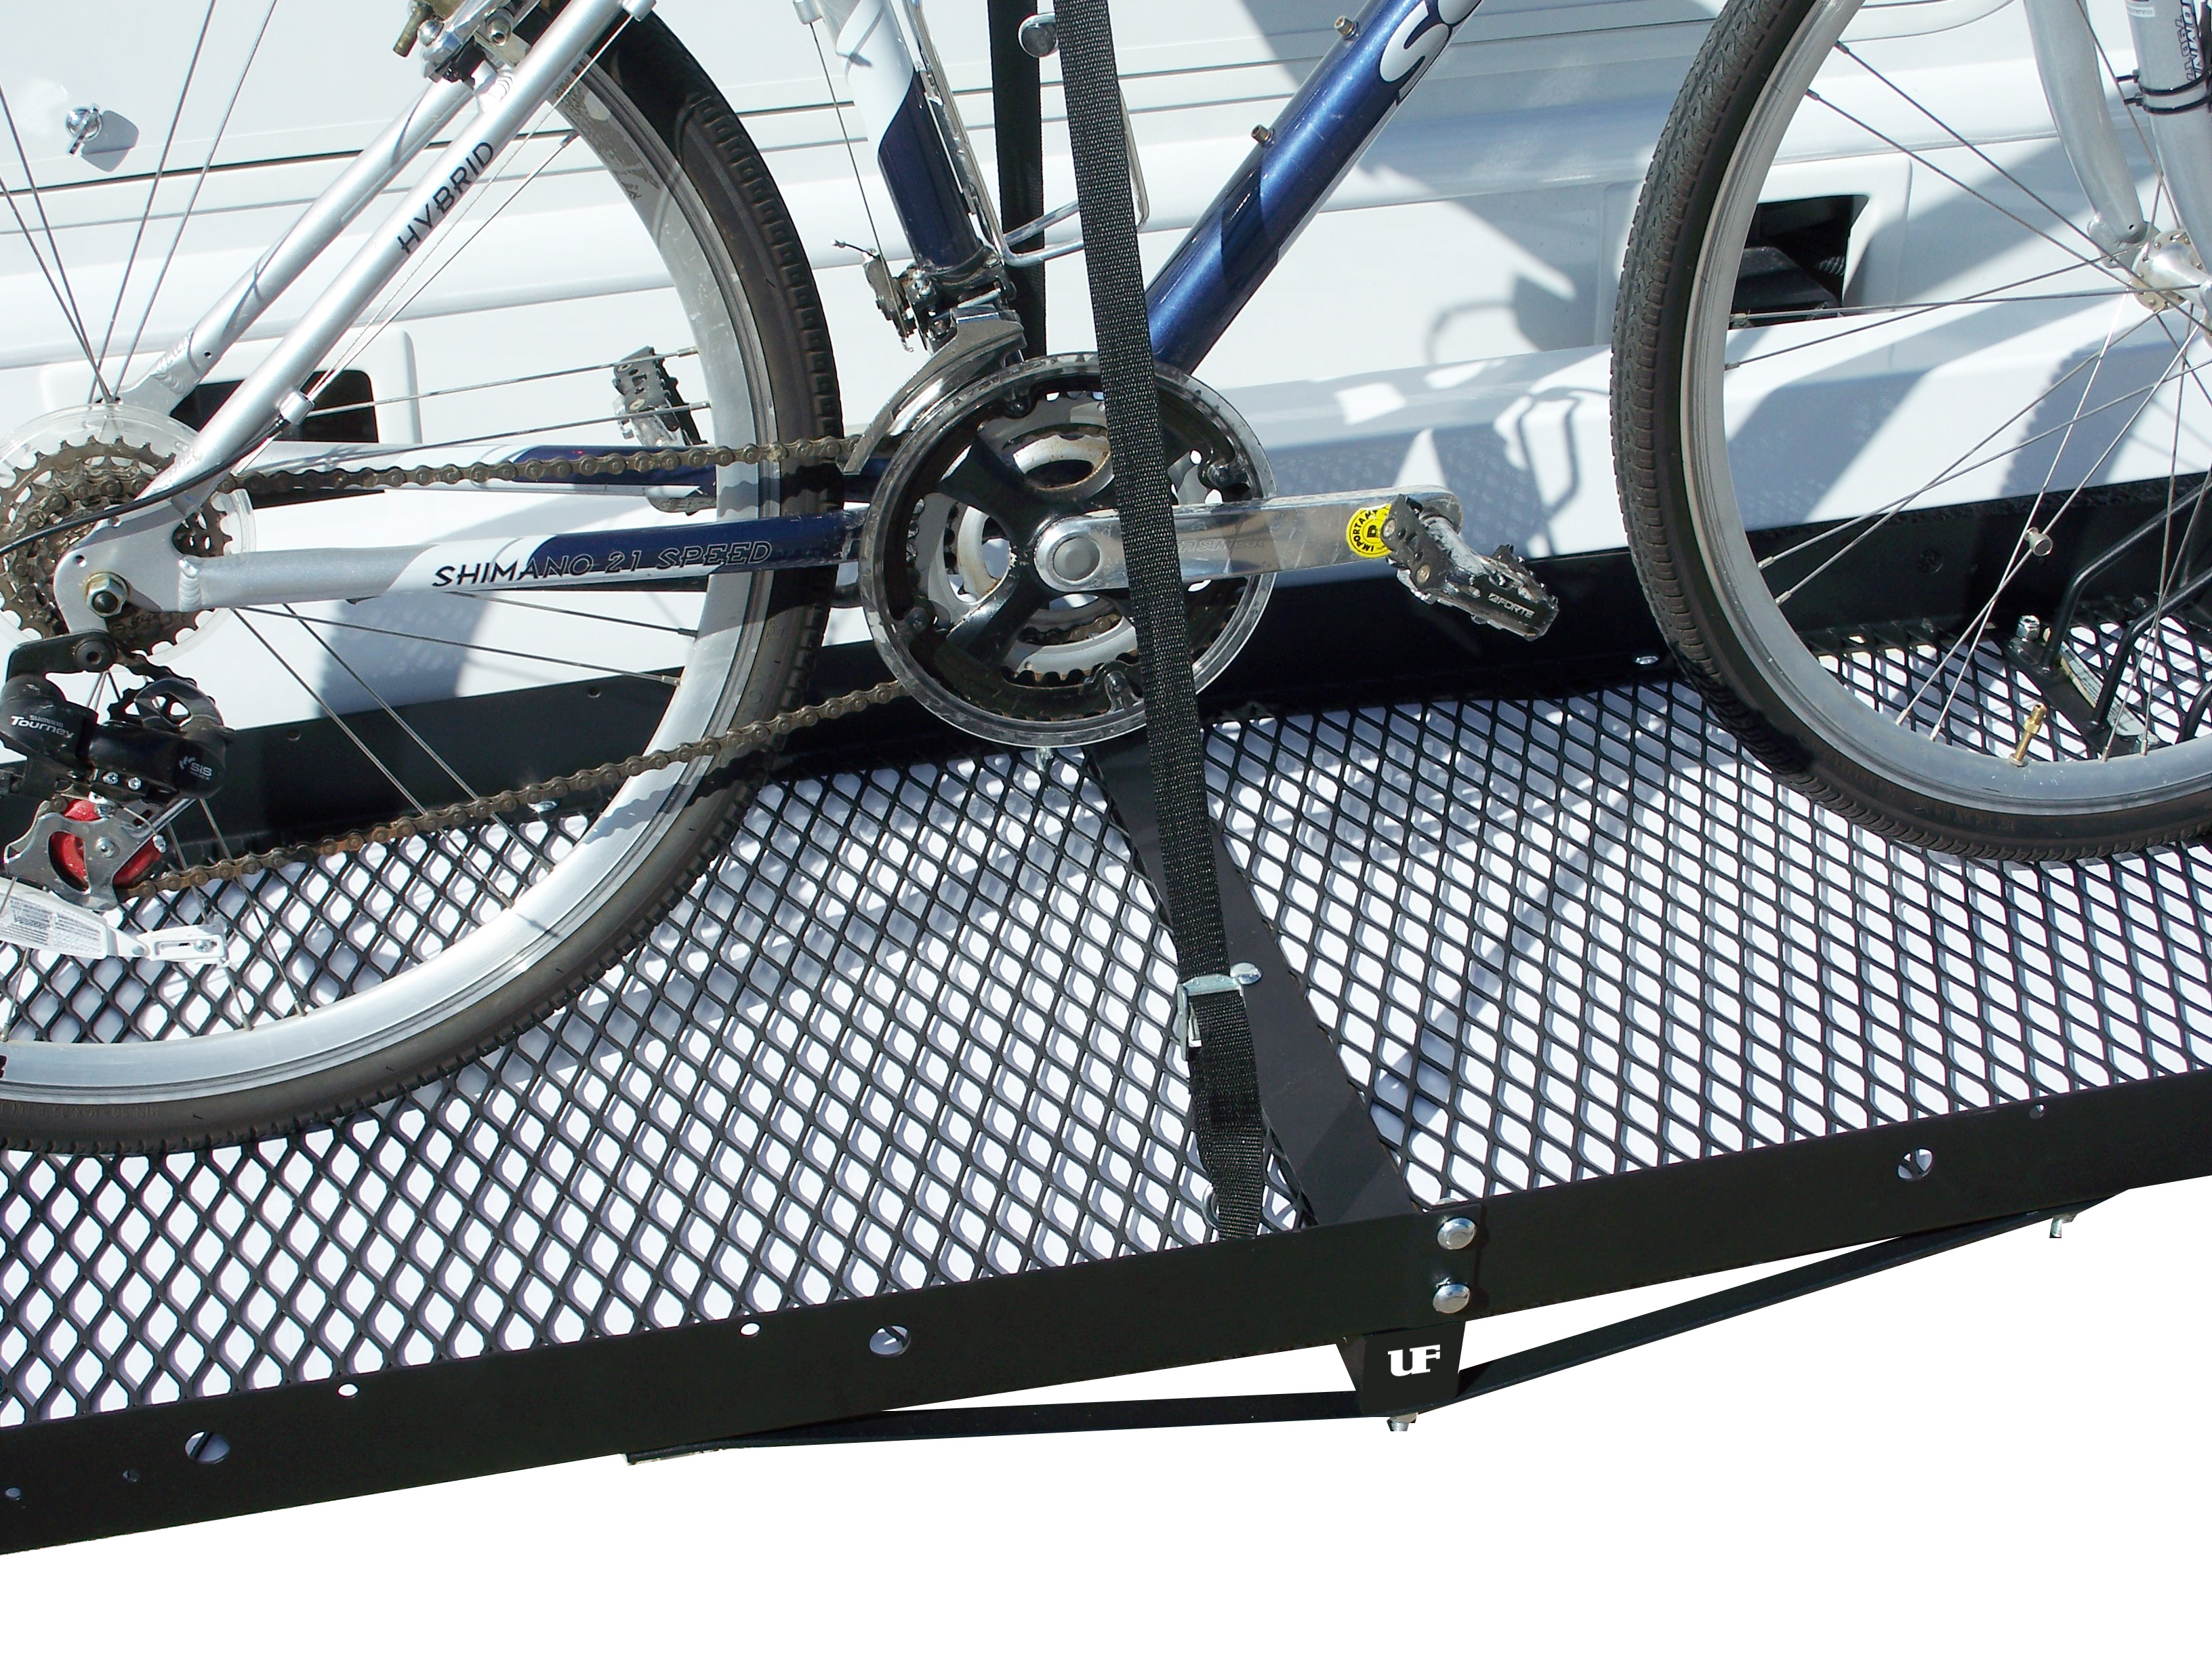 cargo carrier with bike rack